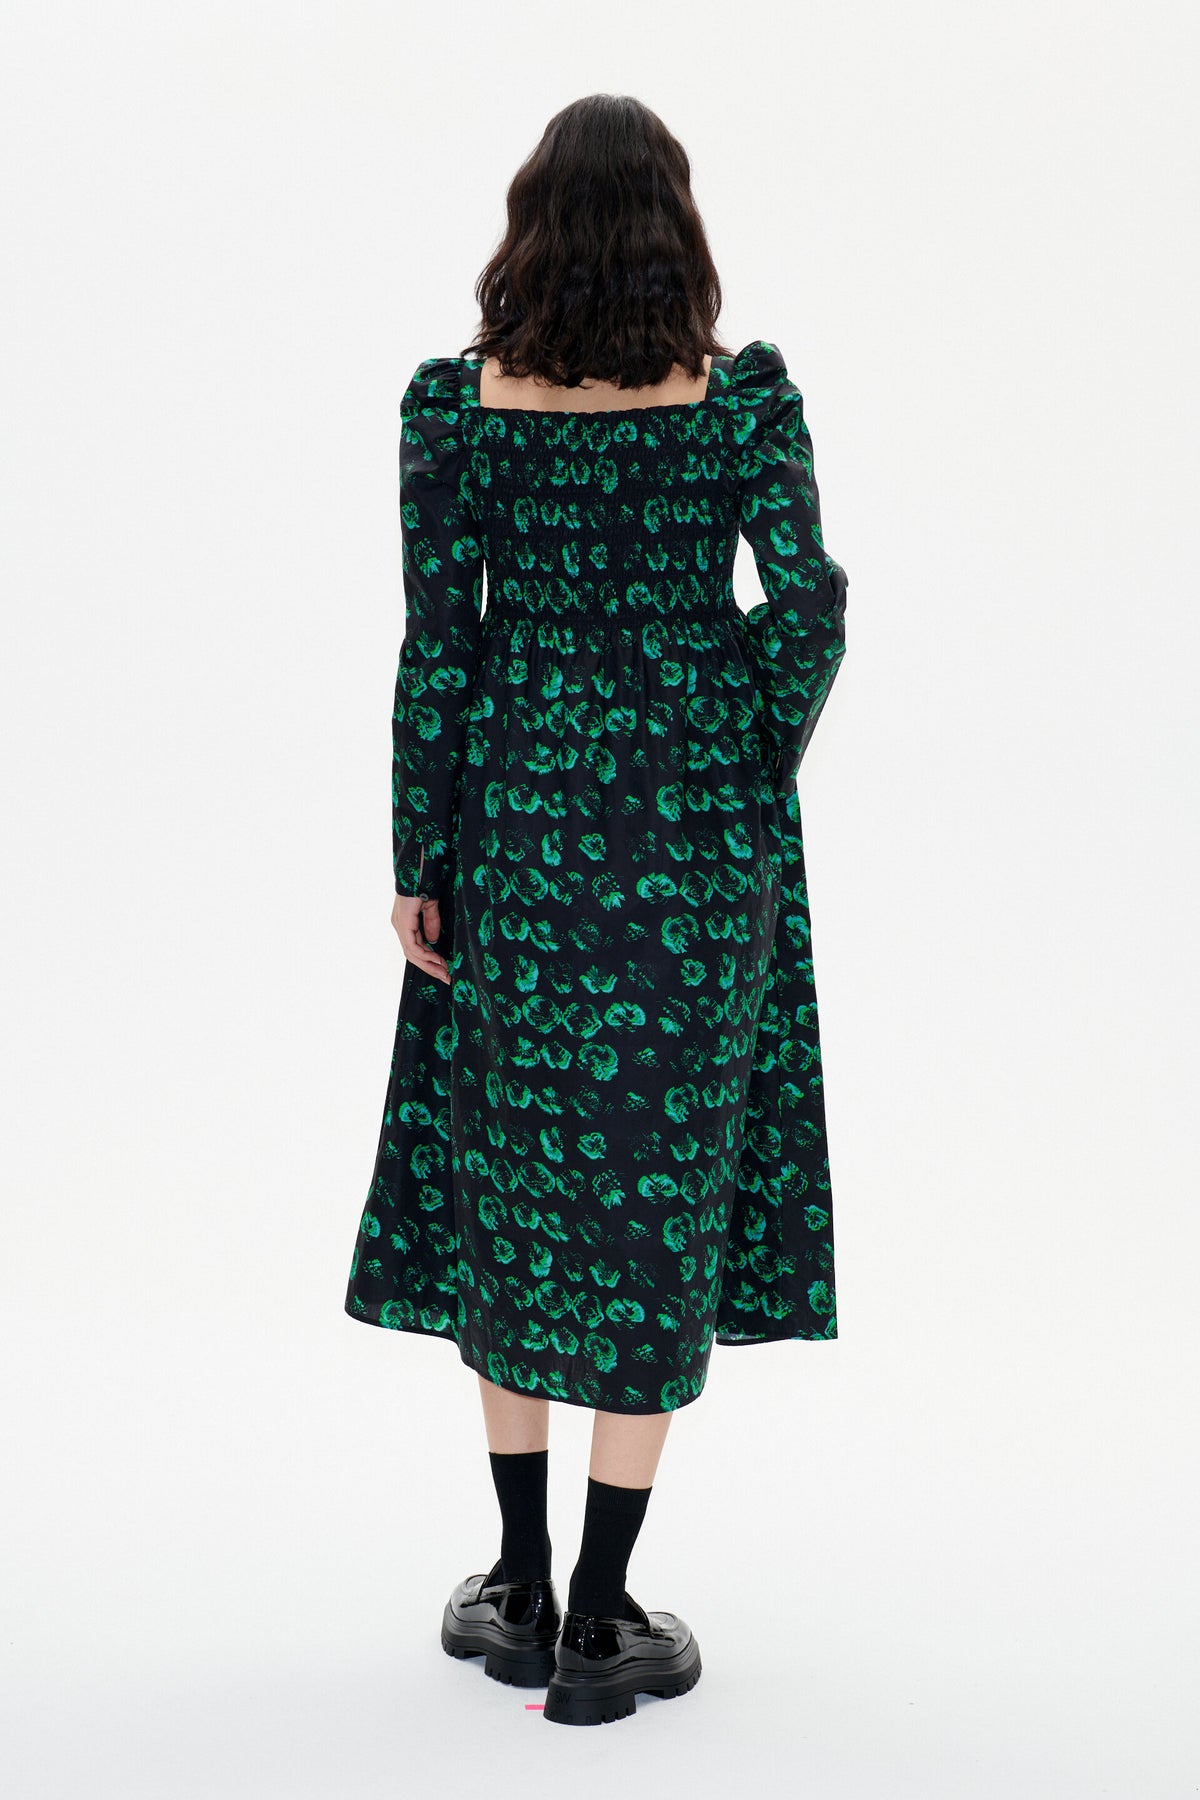 Black and green midi dress with full skirt long sleeves and ruched bodice with distorted pansy print